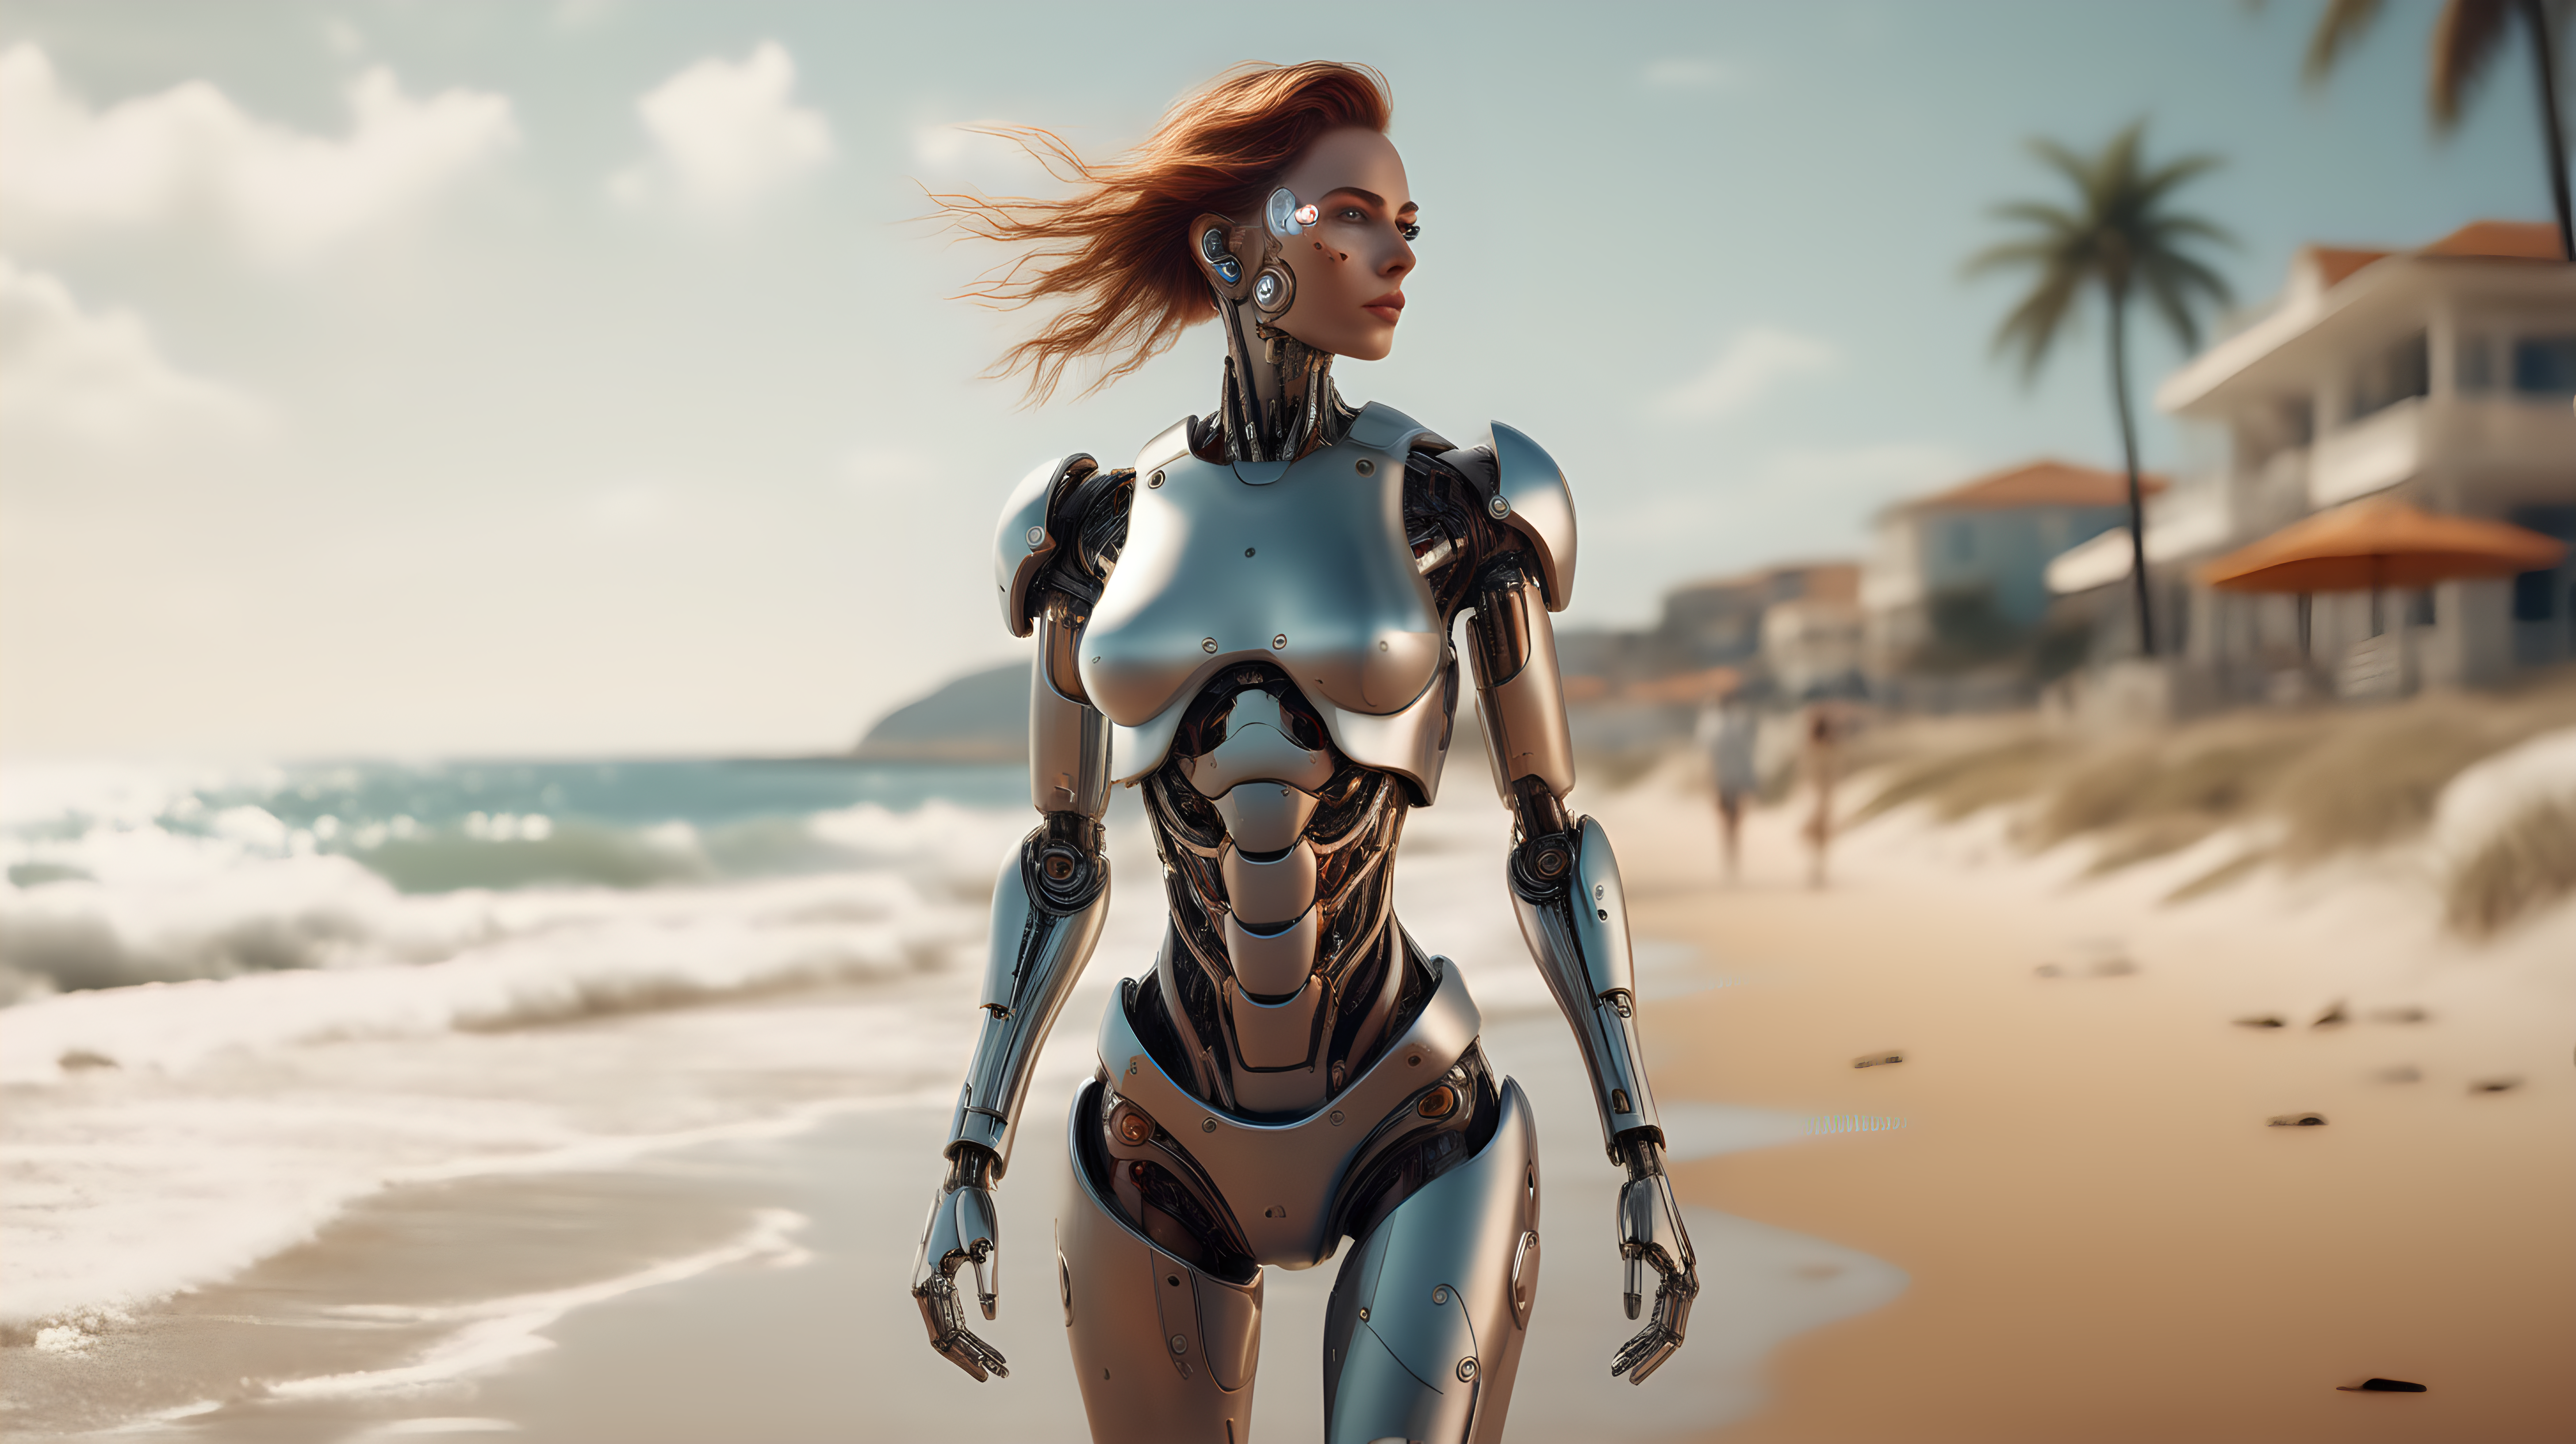 A woman cyborg in a delightful afternoon.
You can see the whole body, walking towards the camera, behind you can see the beach. Extremely realistic textures and warm colors give the final touch. Sharp focus and realistic shadows add to the scene. A perfect example of cinematic shot. Use muted colors to add to the scene